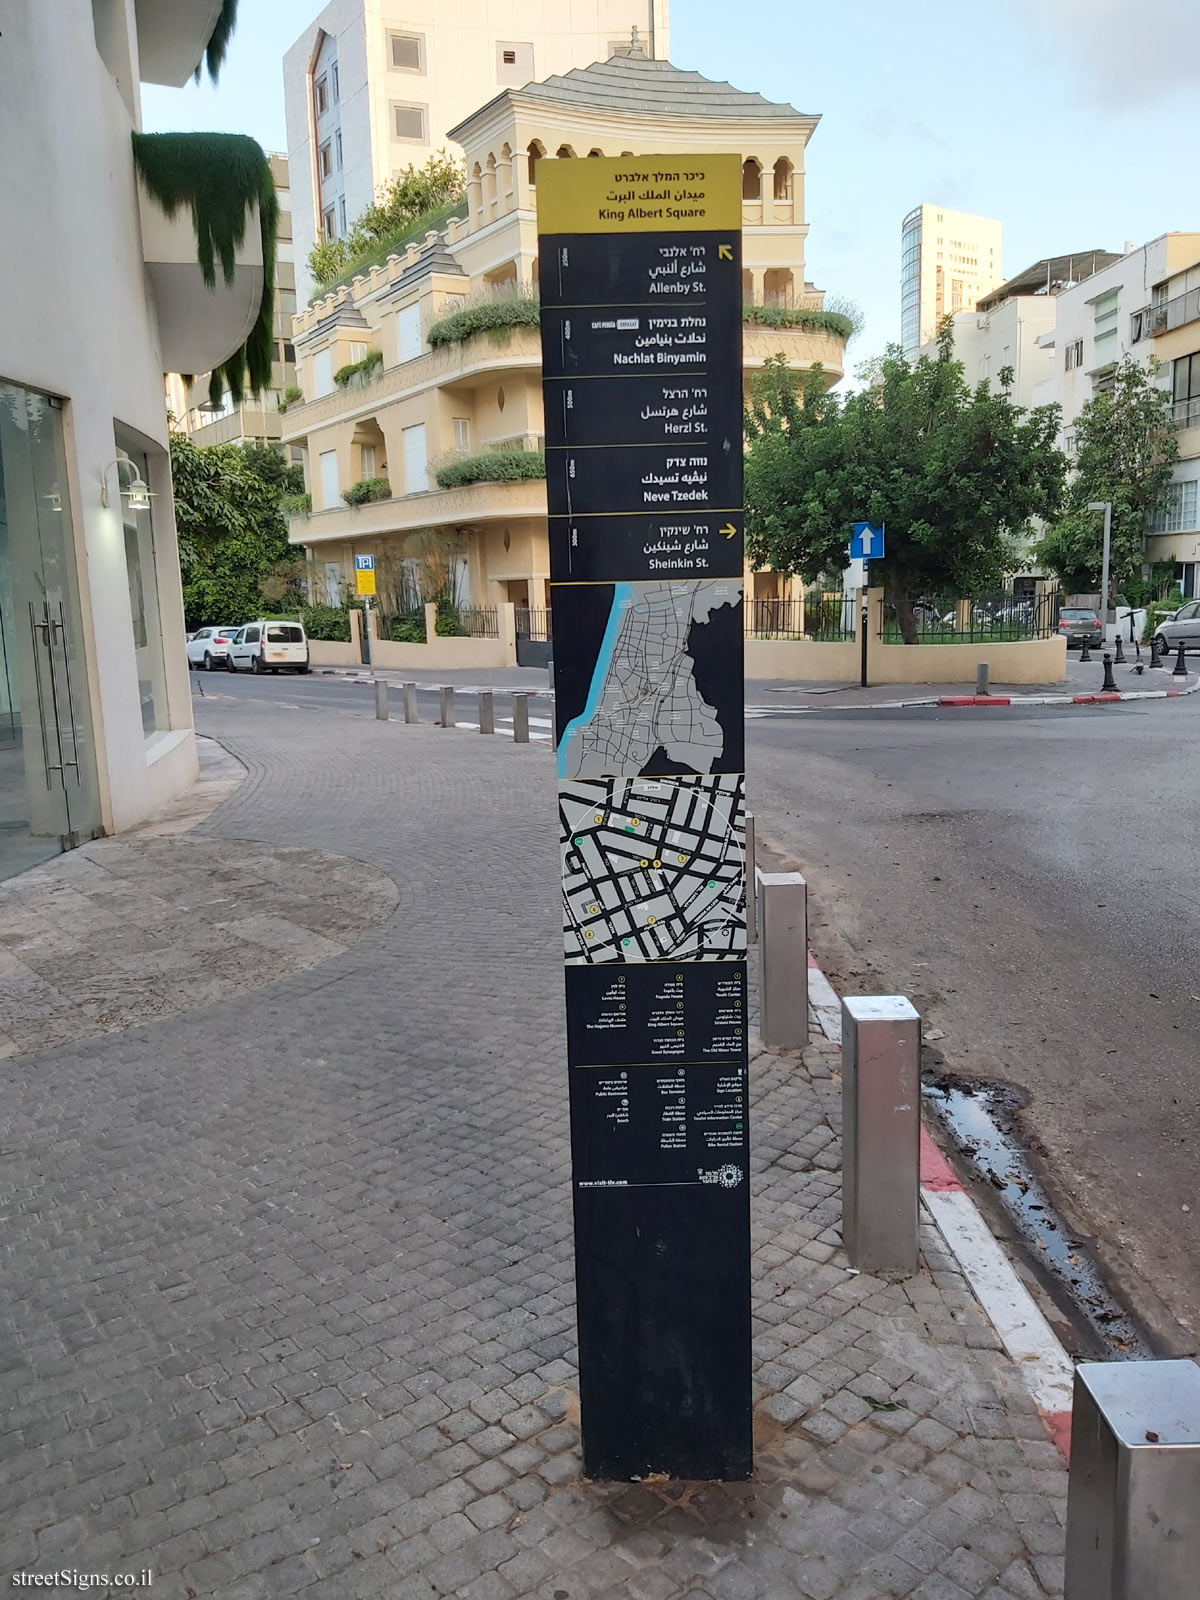 Tel Aviv - King Albert Square  (the other side of the sign)